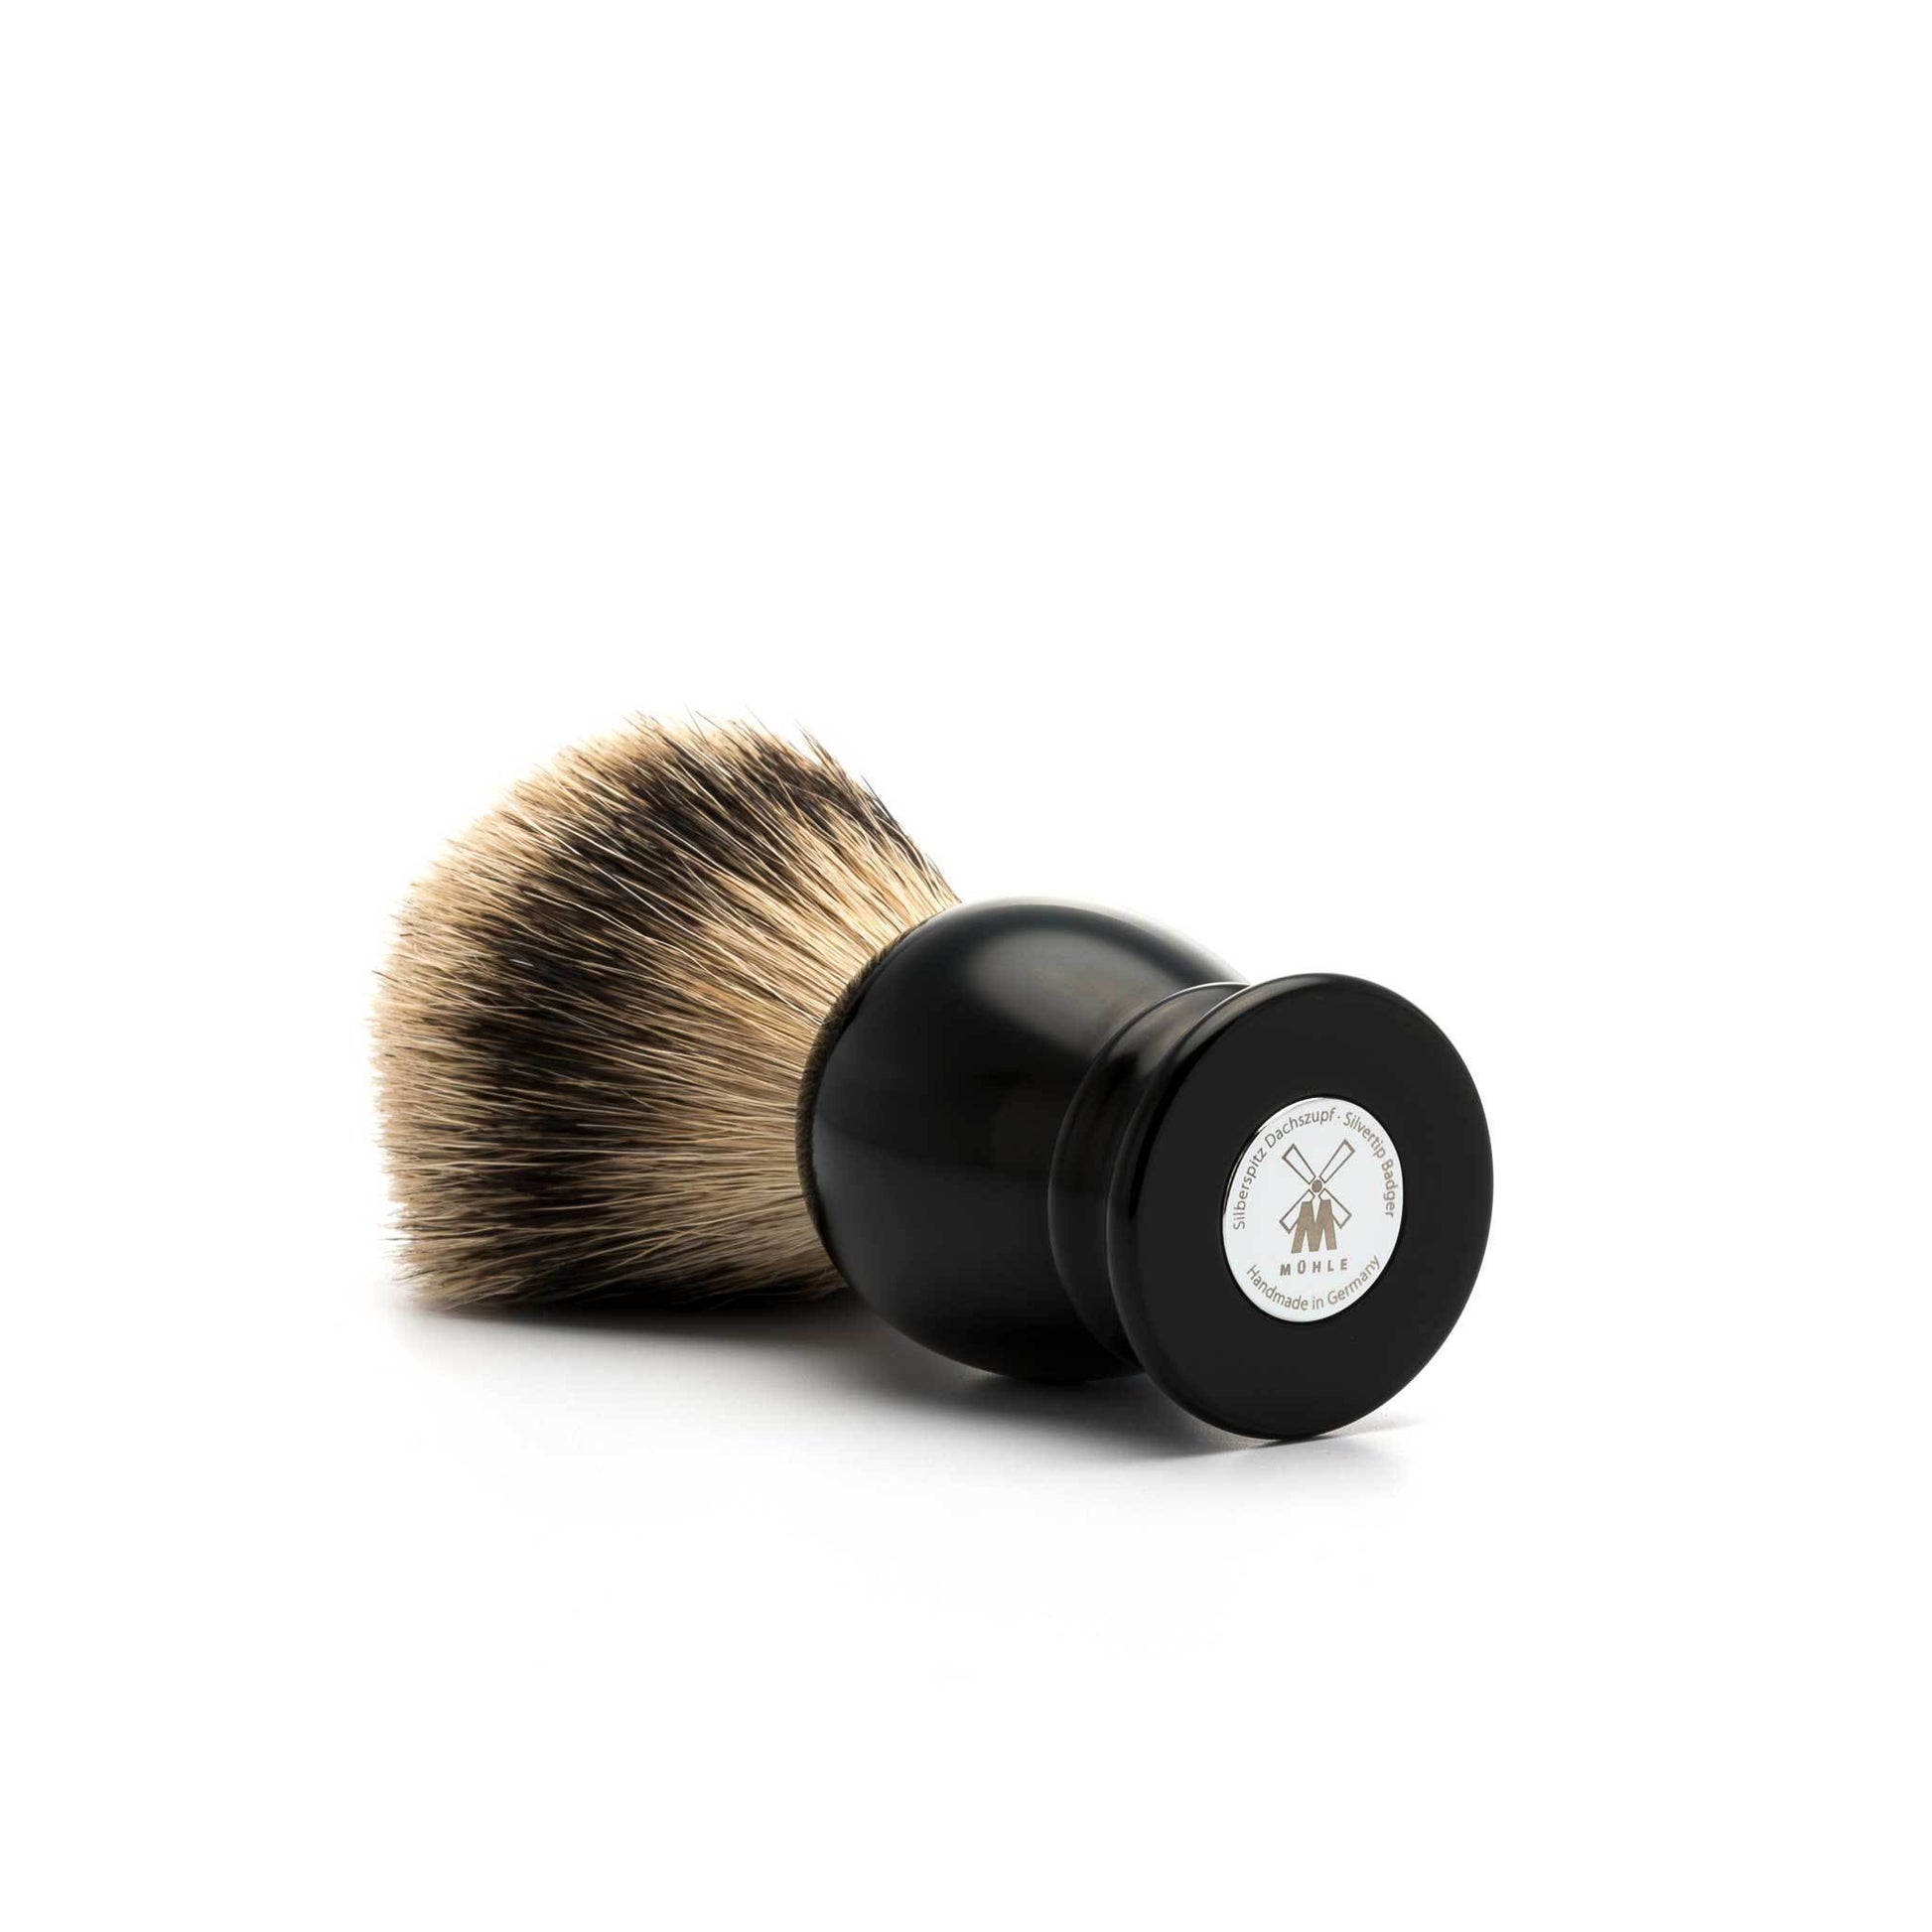 Mühle Classic Style Silvertip barberkost Barberkost - Silvertip Badger Mühle 